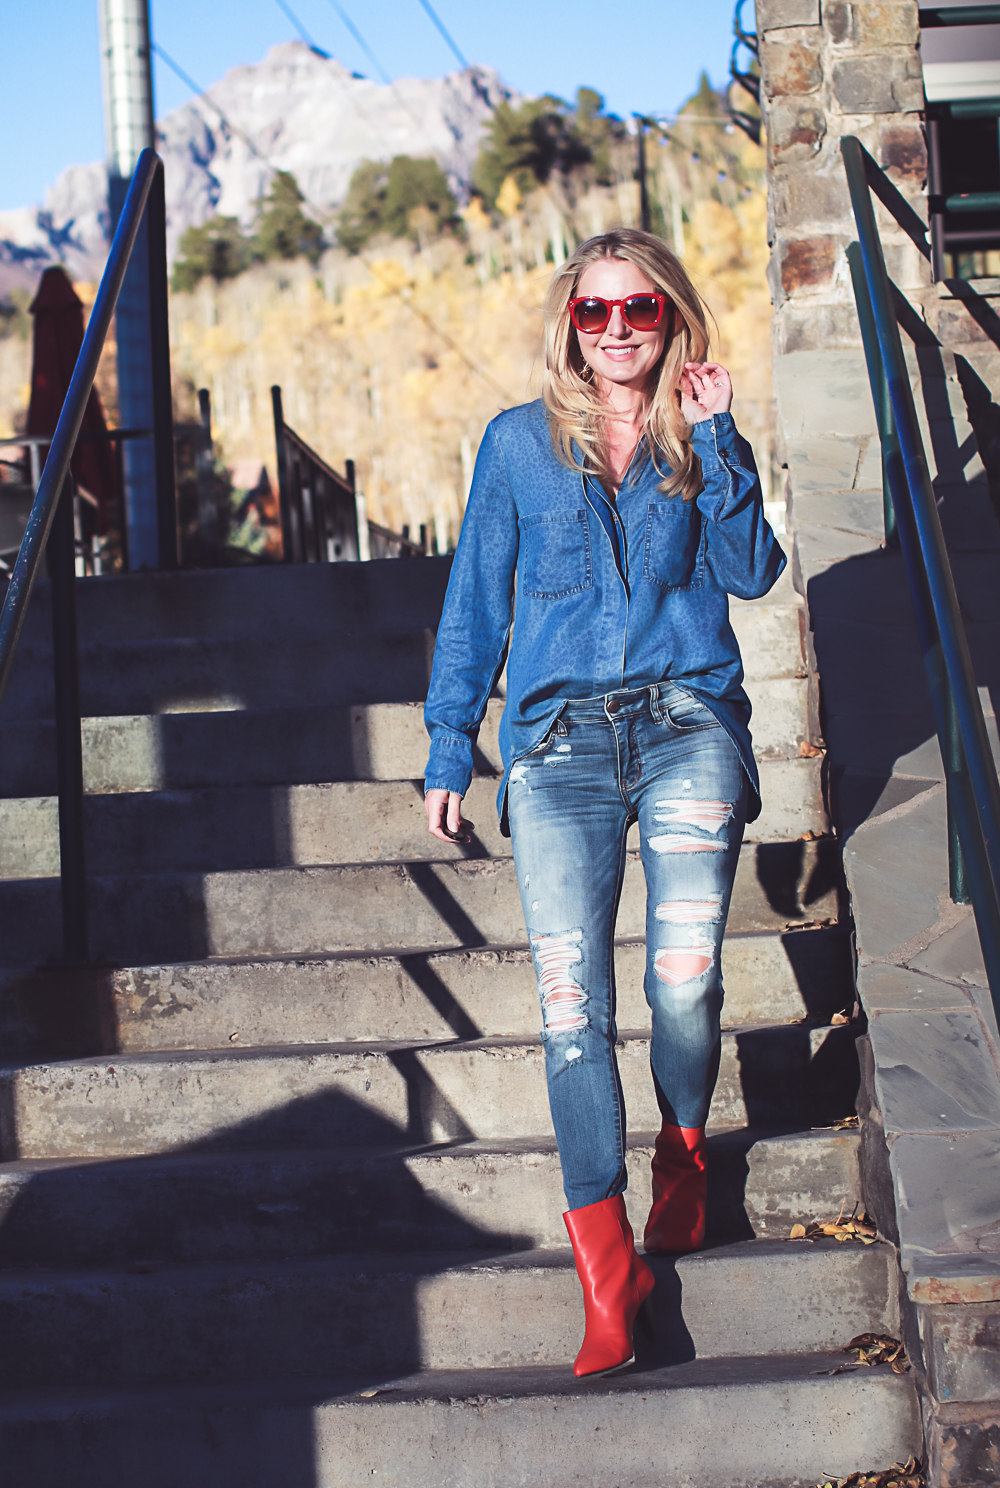 How to wear red boots, red booties by Dolce Vita with denim on denim look, American Eagle jeans, Bella Dahl chambray shirt, on fashion blogger over 40, Erin Busbee of Busbee Style in Mountain Village, Colorado